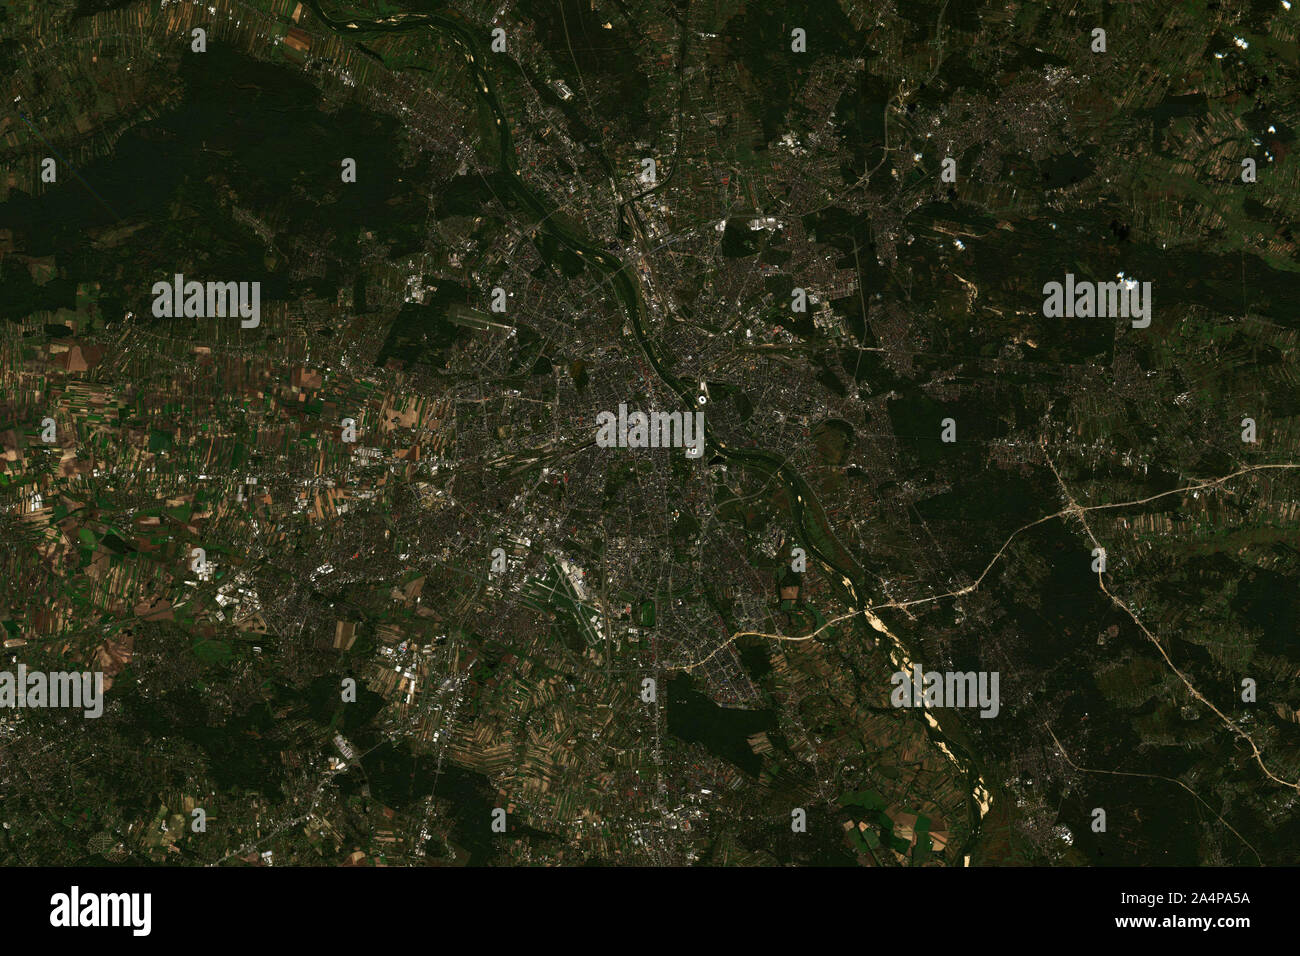 Warsaw, the capital of Poland, seen from space - contains modified Copernicus Sentinel Data (2019) Stock Photo